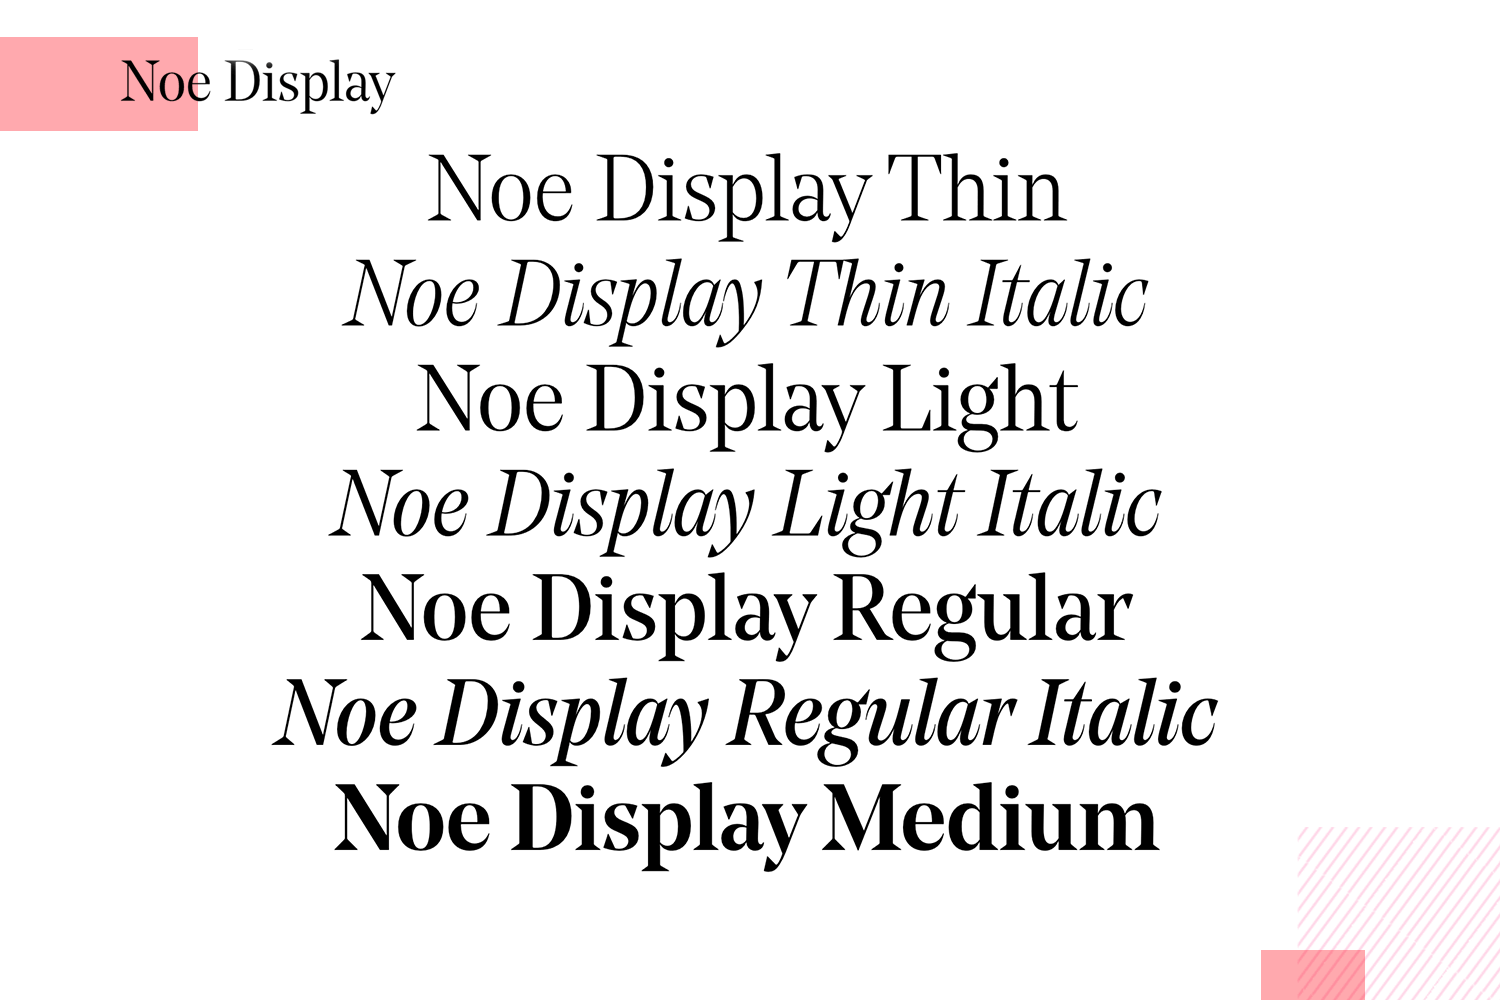 Noe Display font variations in bold, italic, regular, and book styles